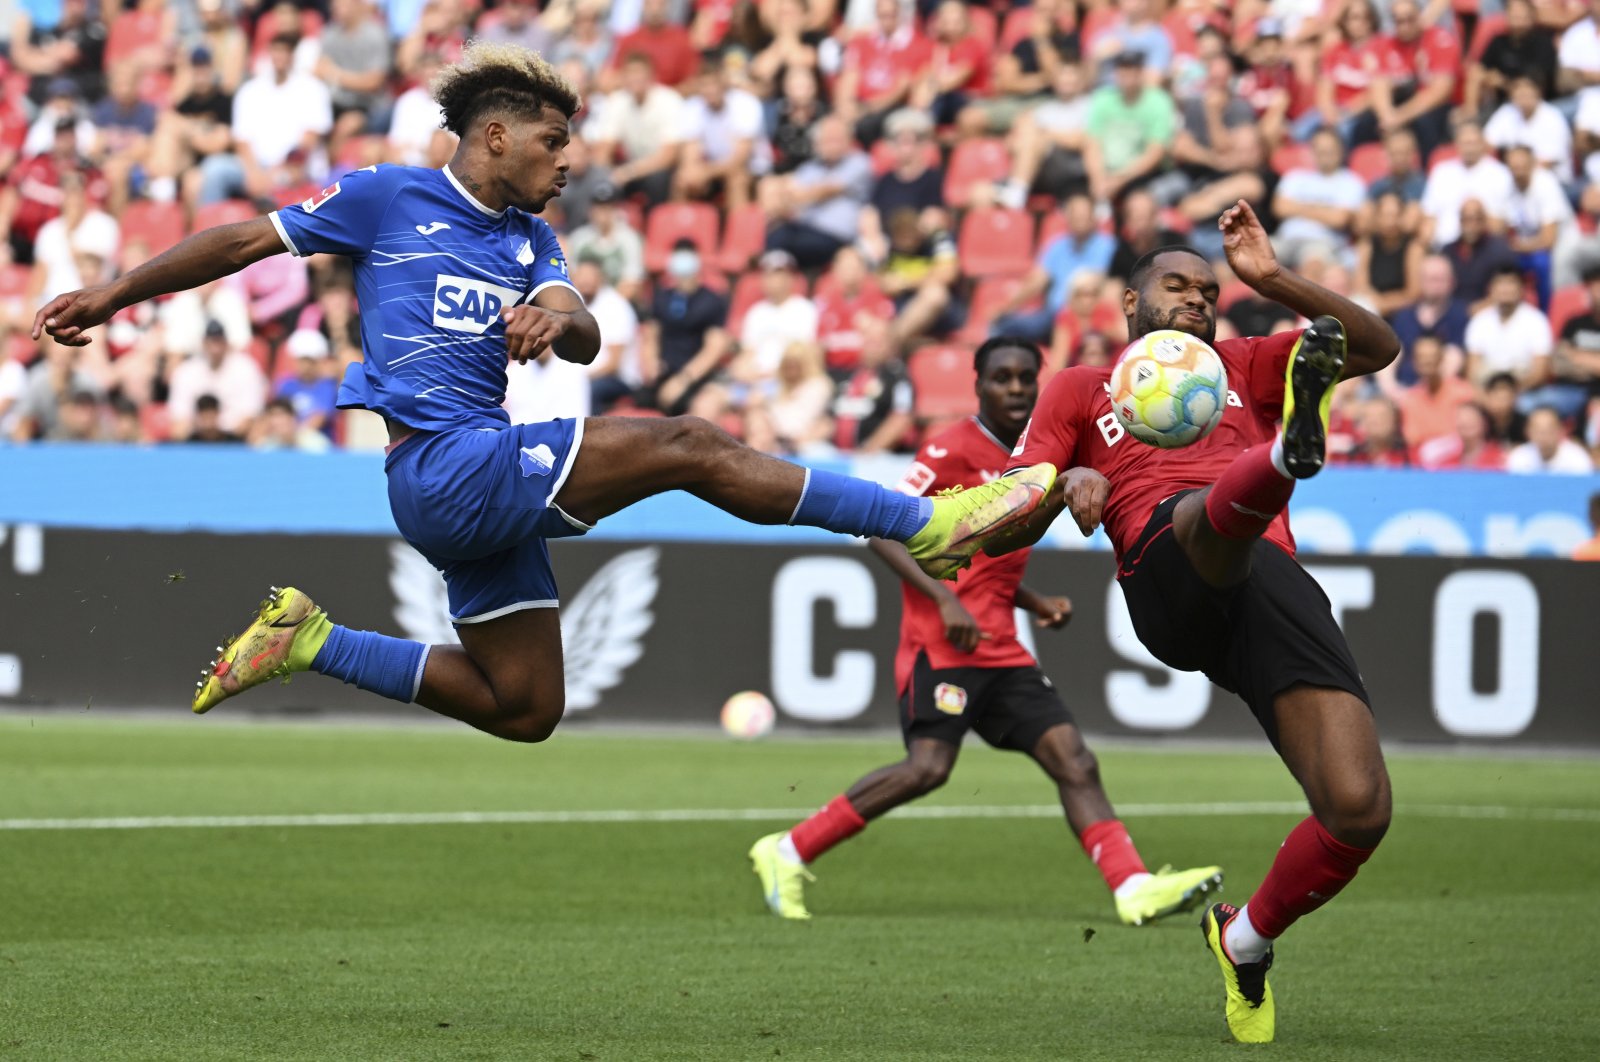 Leverkusen&#039;s Jonathan Tah (R) and Hoffenheim&#039;s Georginio Rutter fight for the ball during a match, in Leverkusen, Germany, Aug. 20, 2022. (AP PHOTO) 